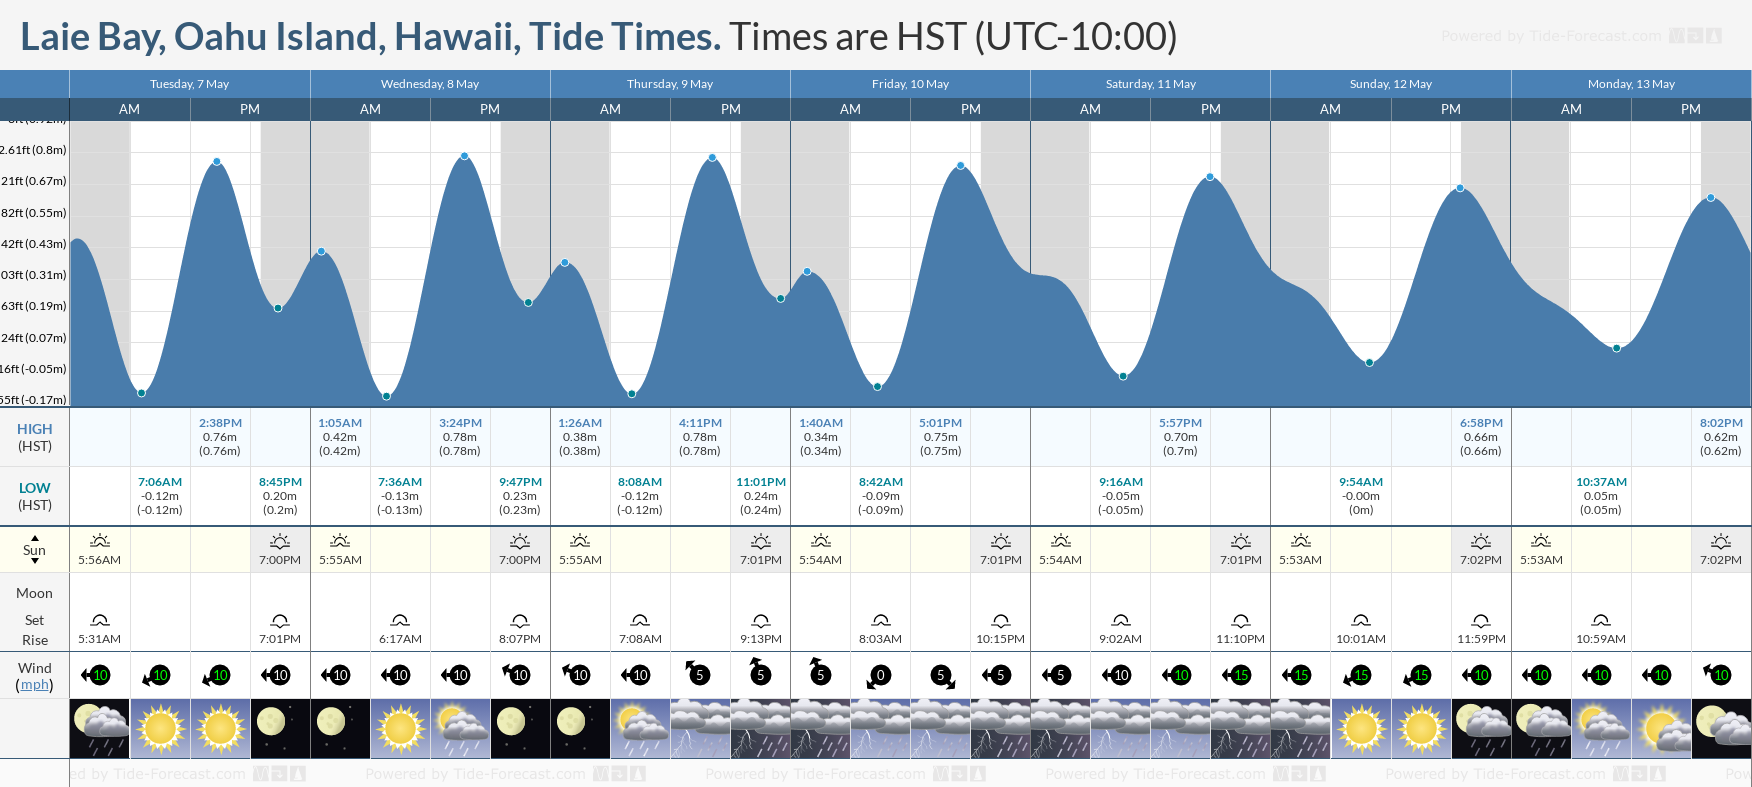 Laie Bay, Oahu Island, Hawaii Tide Chart including high and low tide tide times for the next 7 days